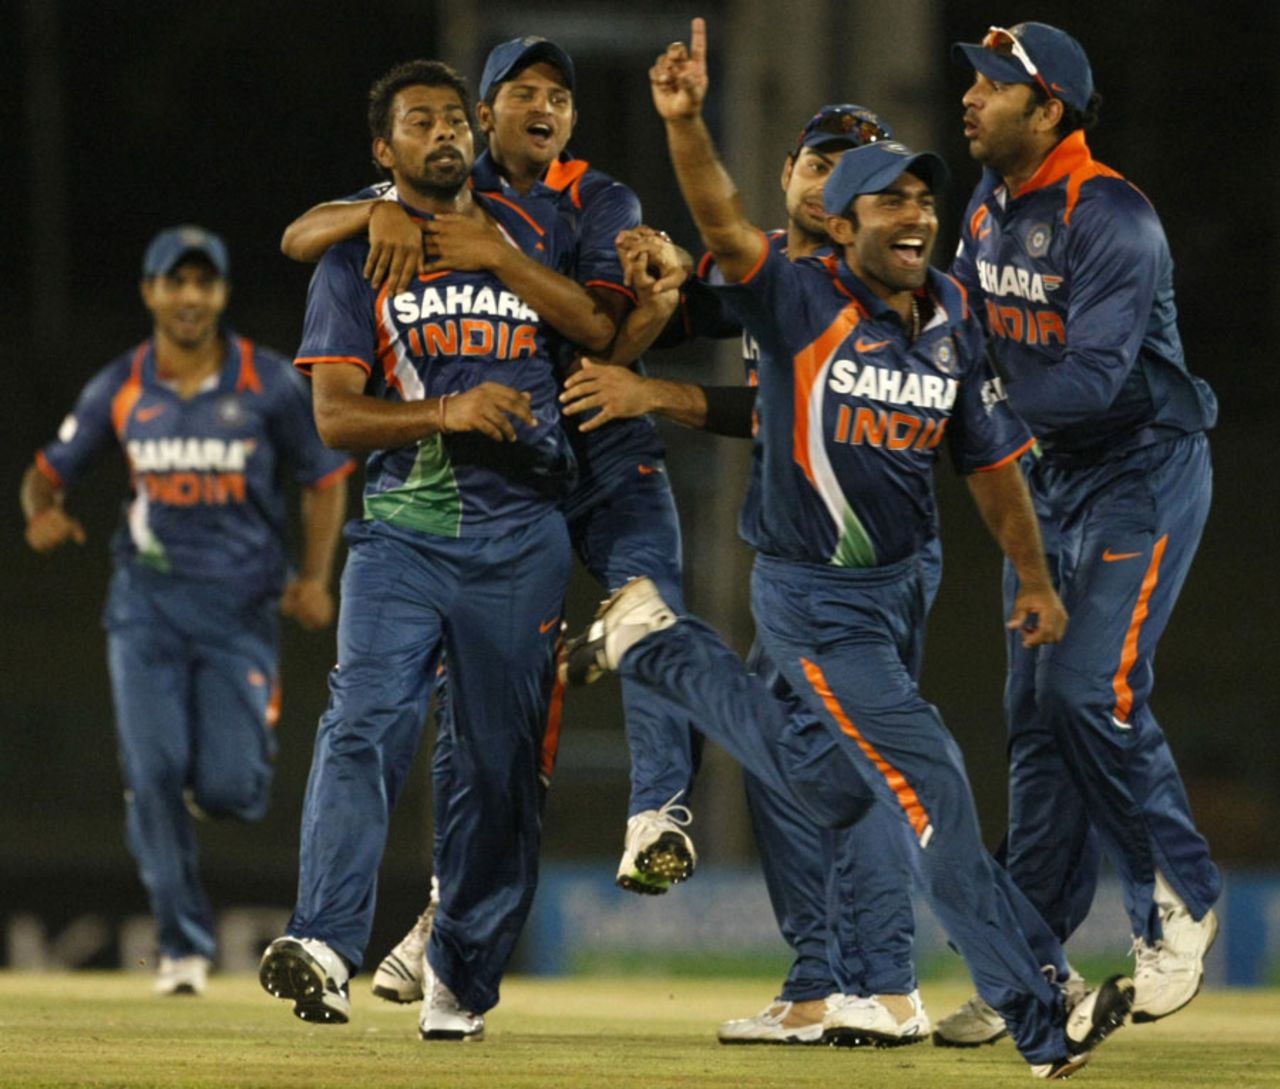 The Indians are delighted after Praveen Kumar dismisses Ross Taylor, 6th ODI, Dambulla, August 25, 2010